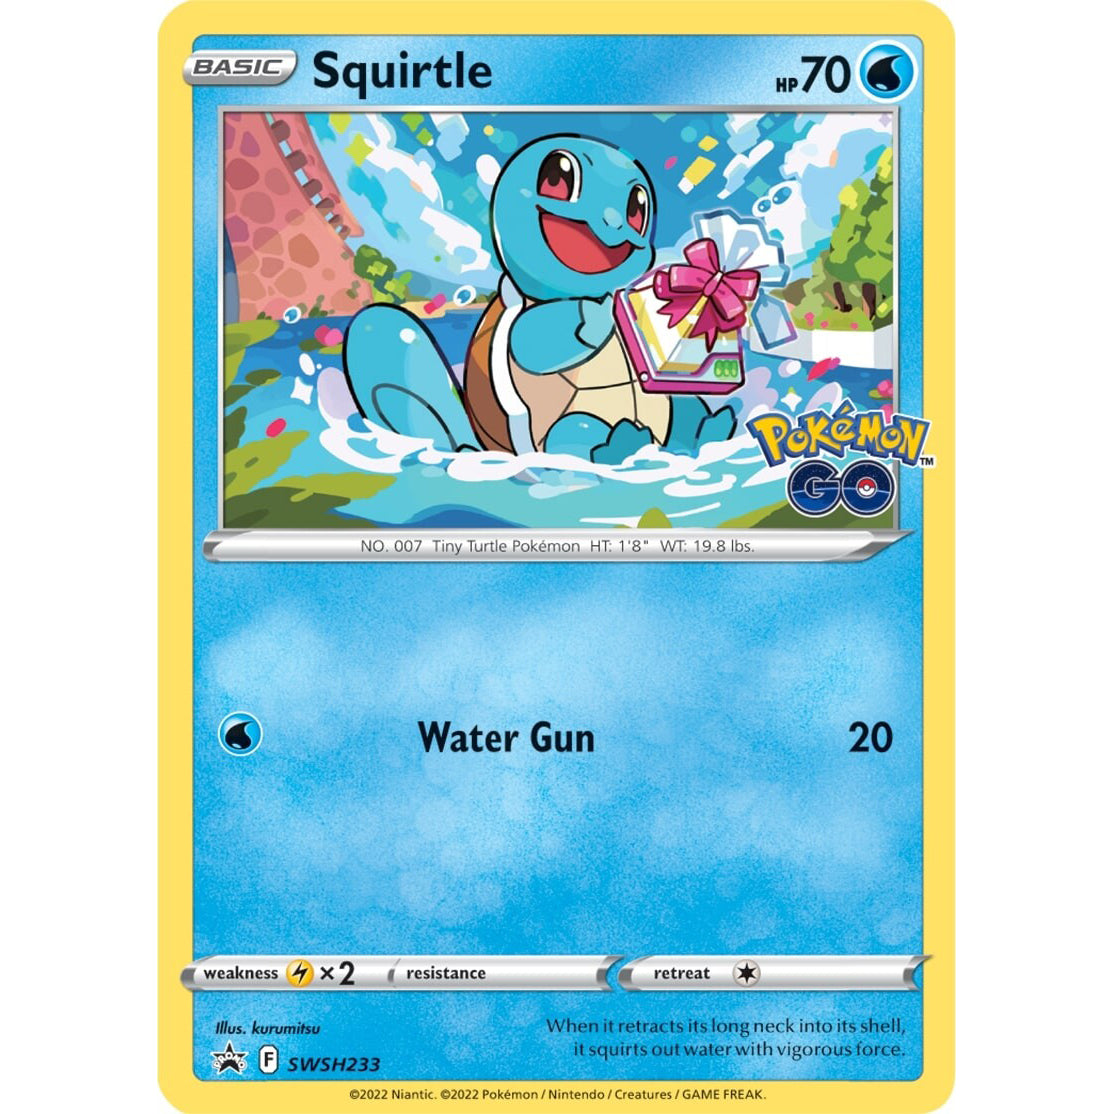 Pokemon GO Squirtle Pin Collection Promo Card SWSH231